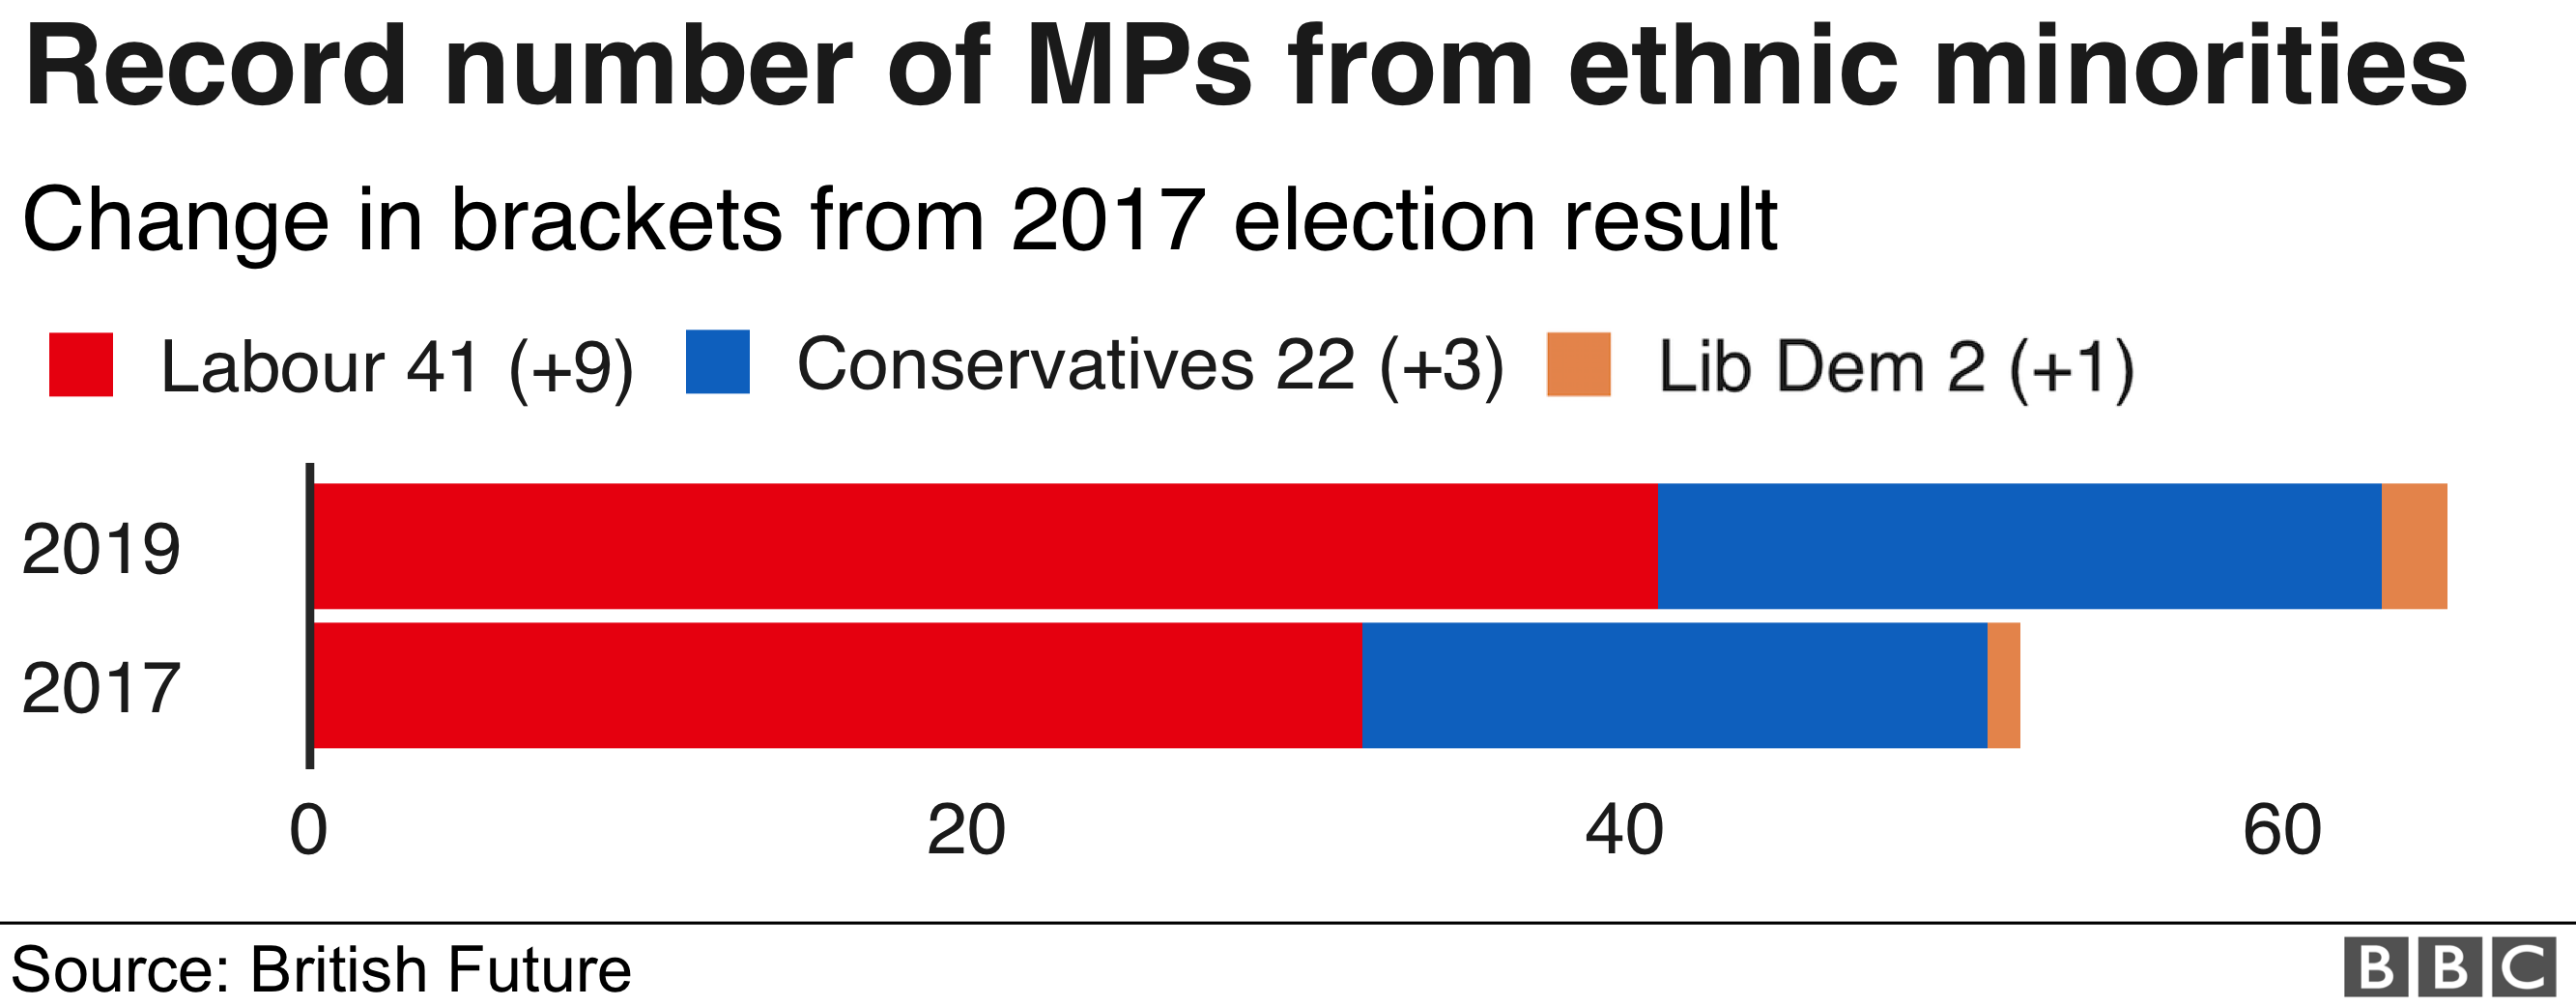 Record number of MPs from ethnic minorities